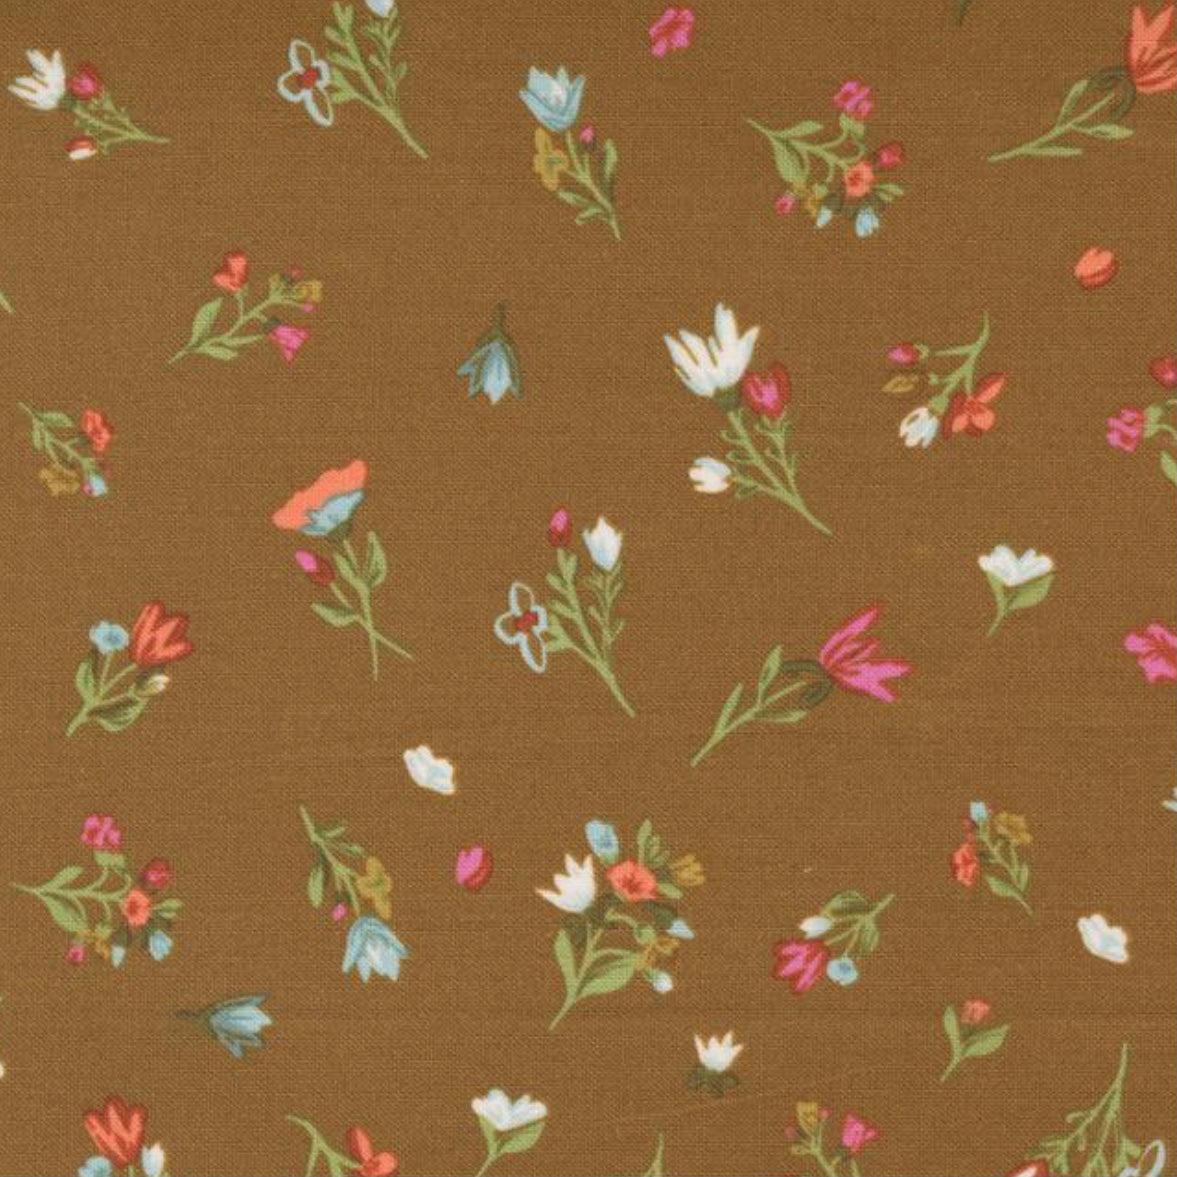 Songbook A New Page Sienna Blessings Flow Small Floral Fabric